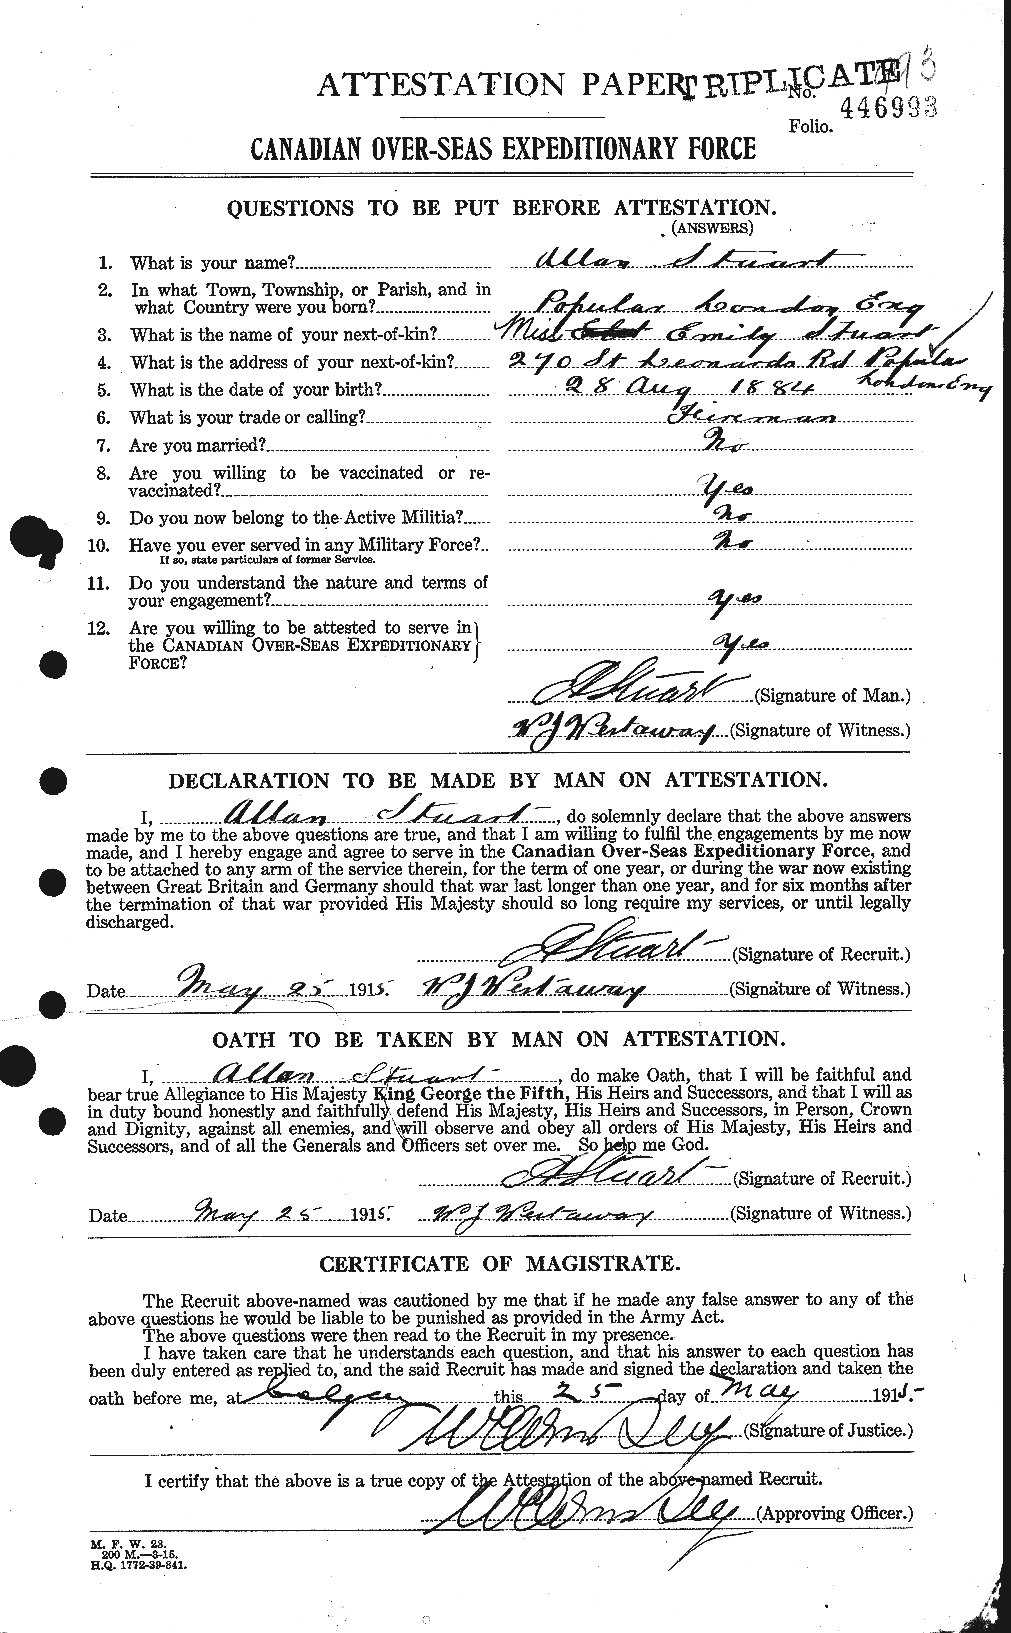 Personnel Records of the First World War - CEF 122324a